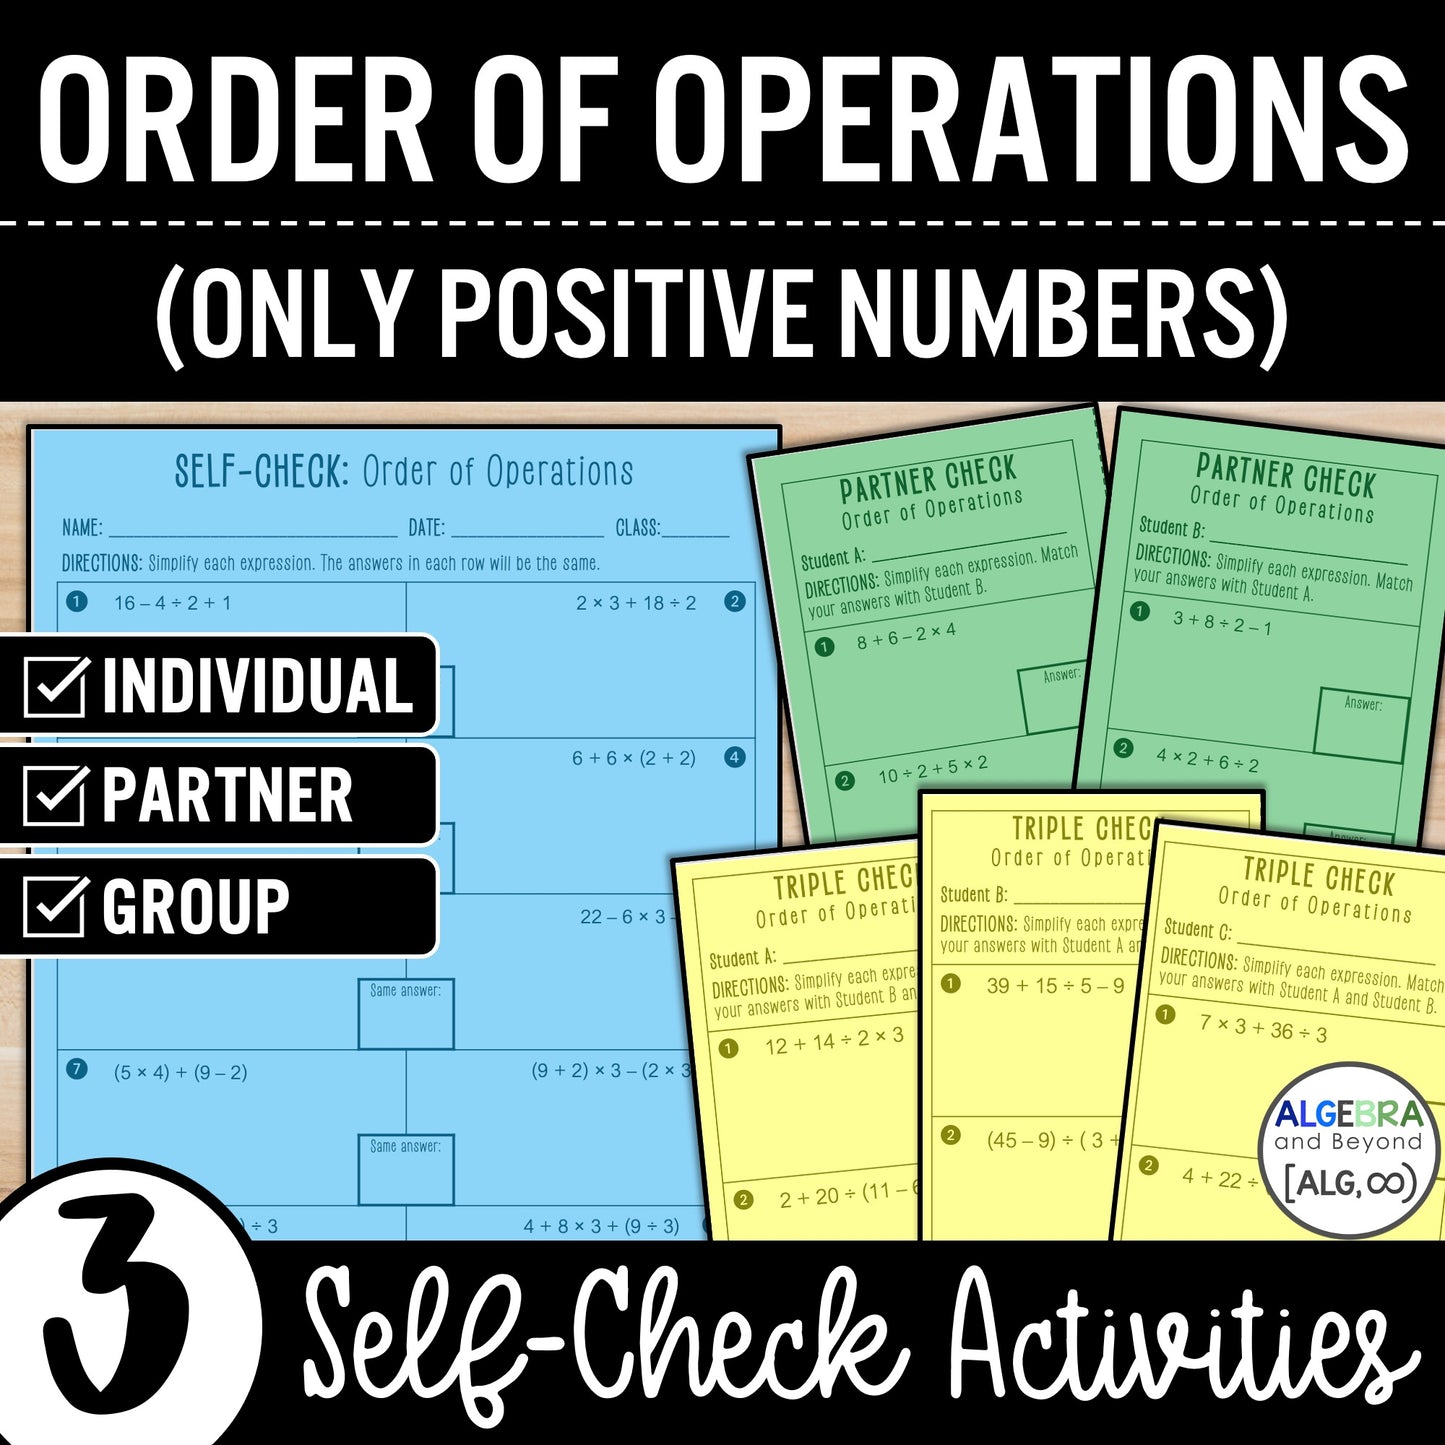 Order of Operations Worksheet | Add | Subtract | Multiply | Divide | No Exponent